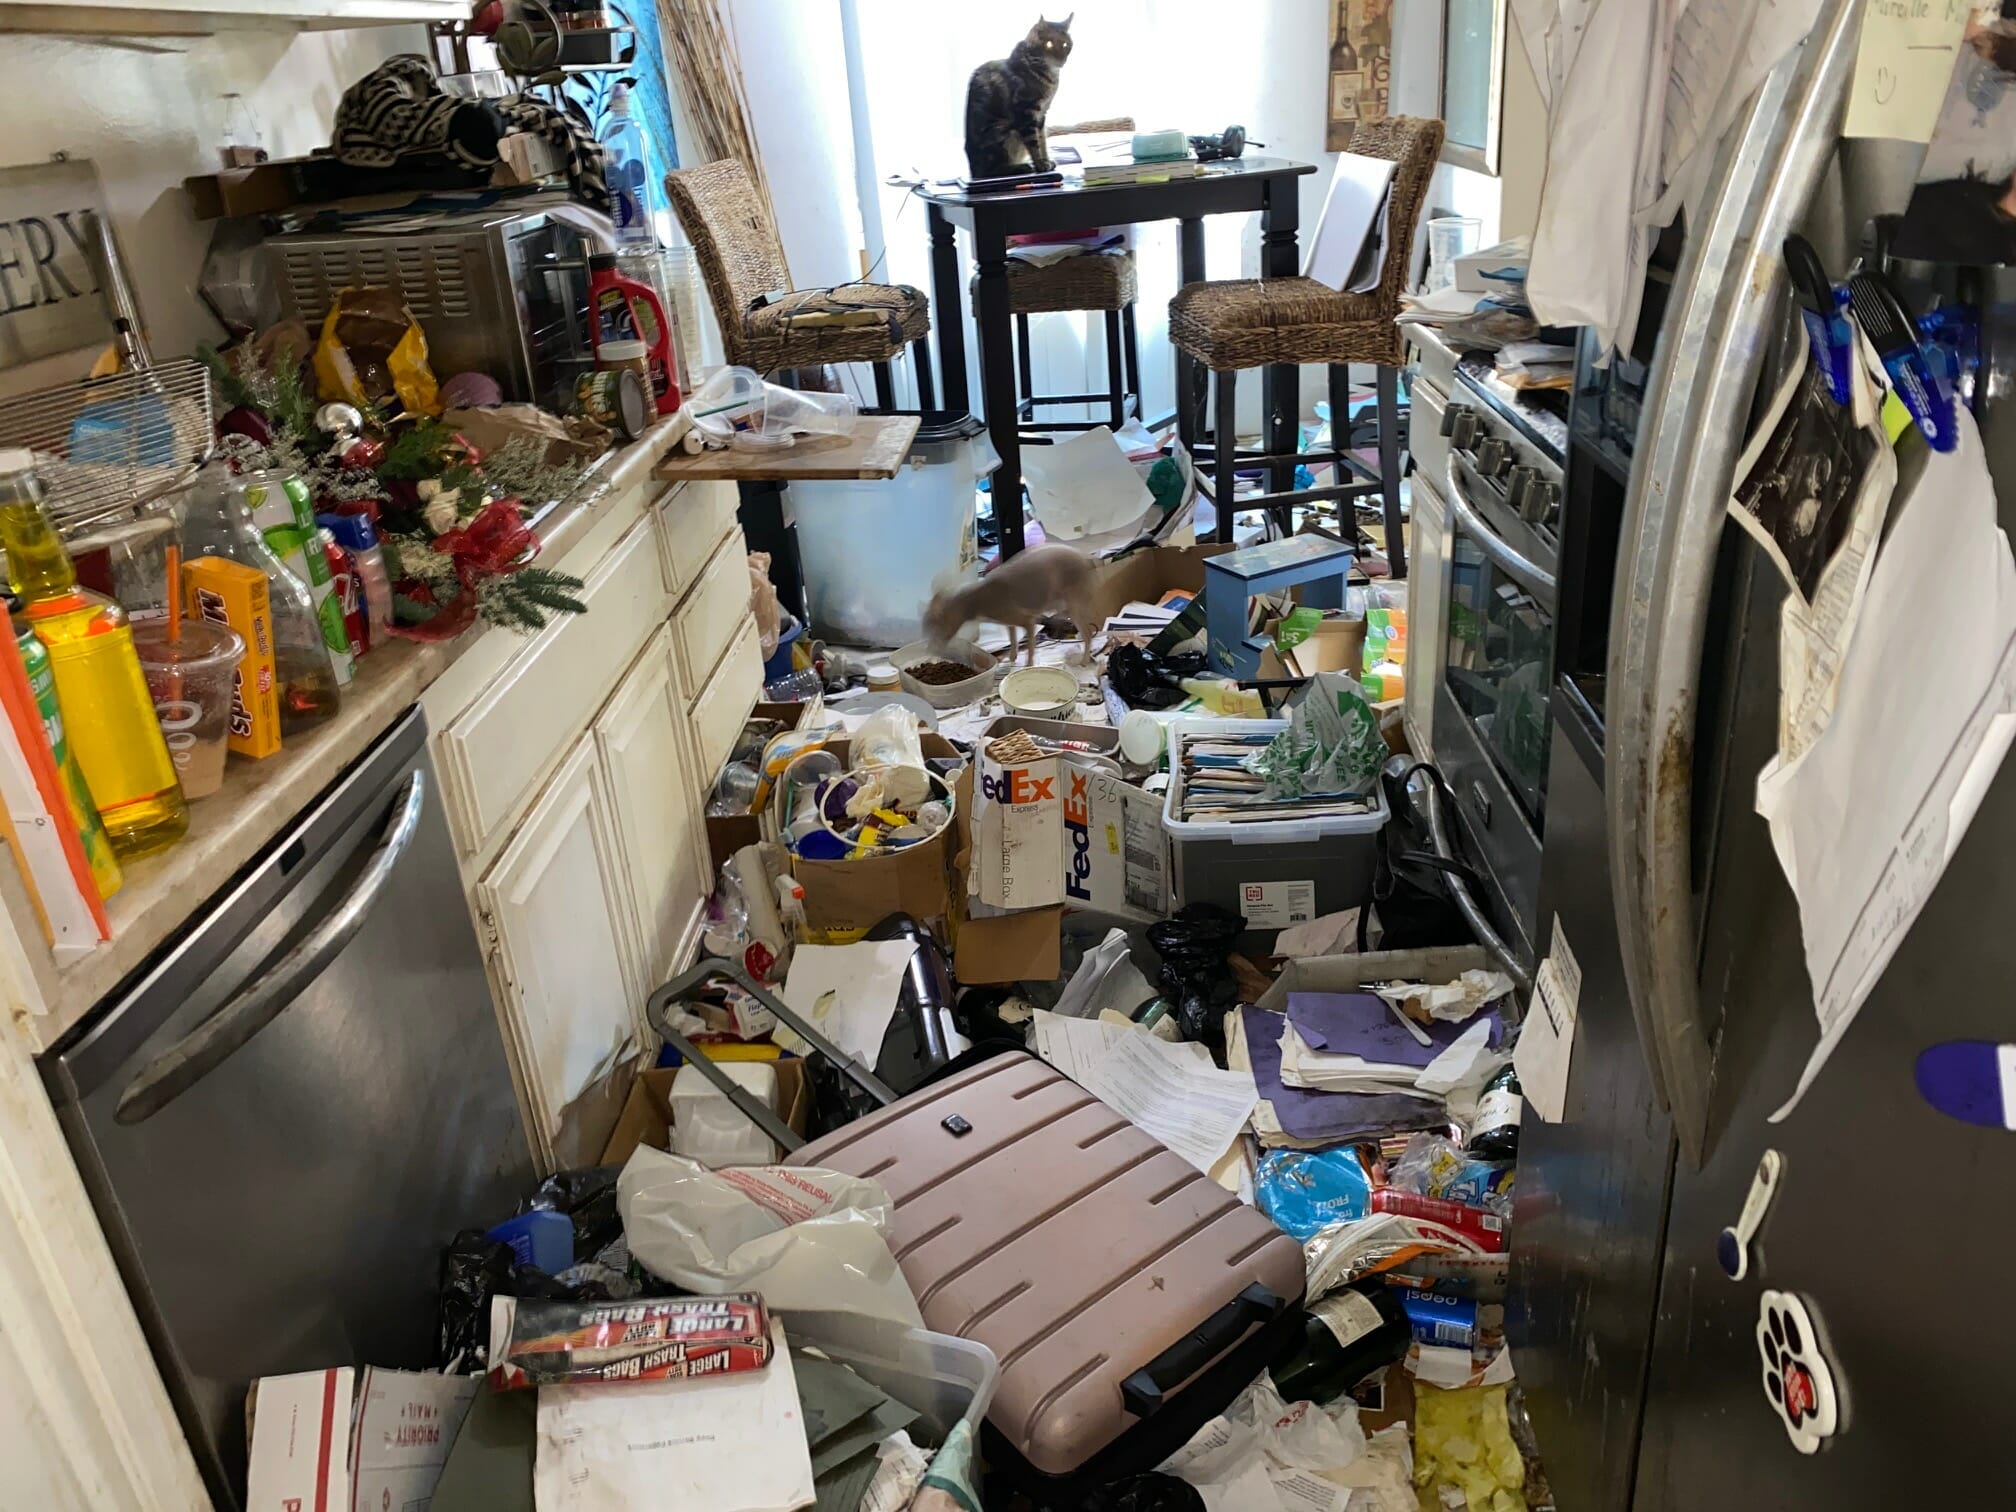 Image shows a kitchen area filled with trash, clutter and even cats. It's near impossible to move around the area, let alone use the kitchen stove and counters. 